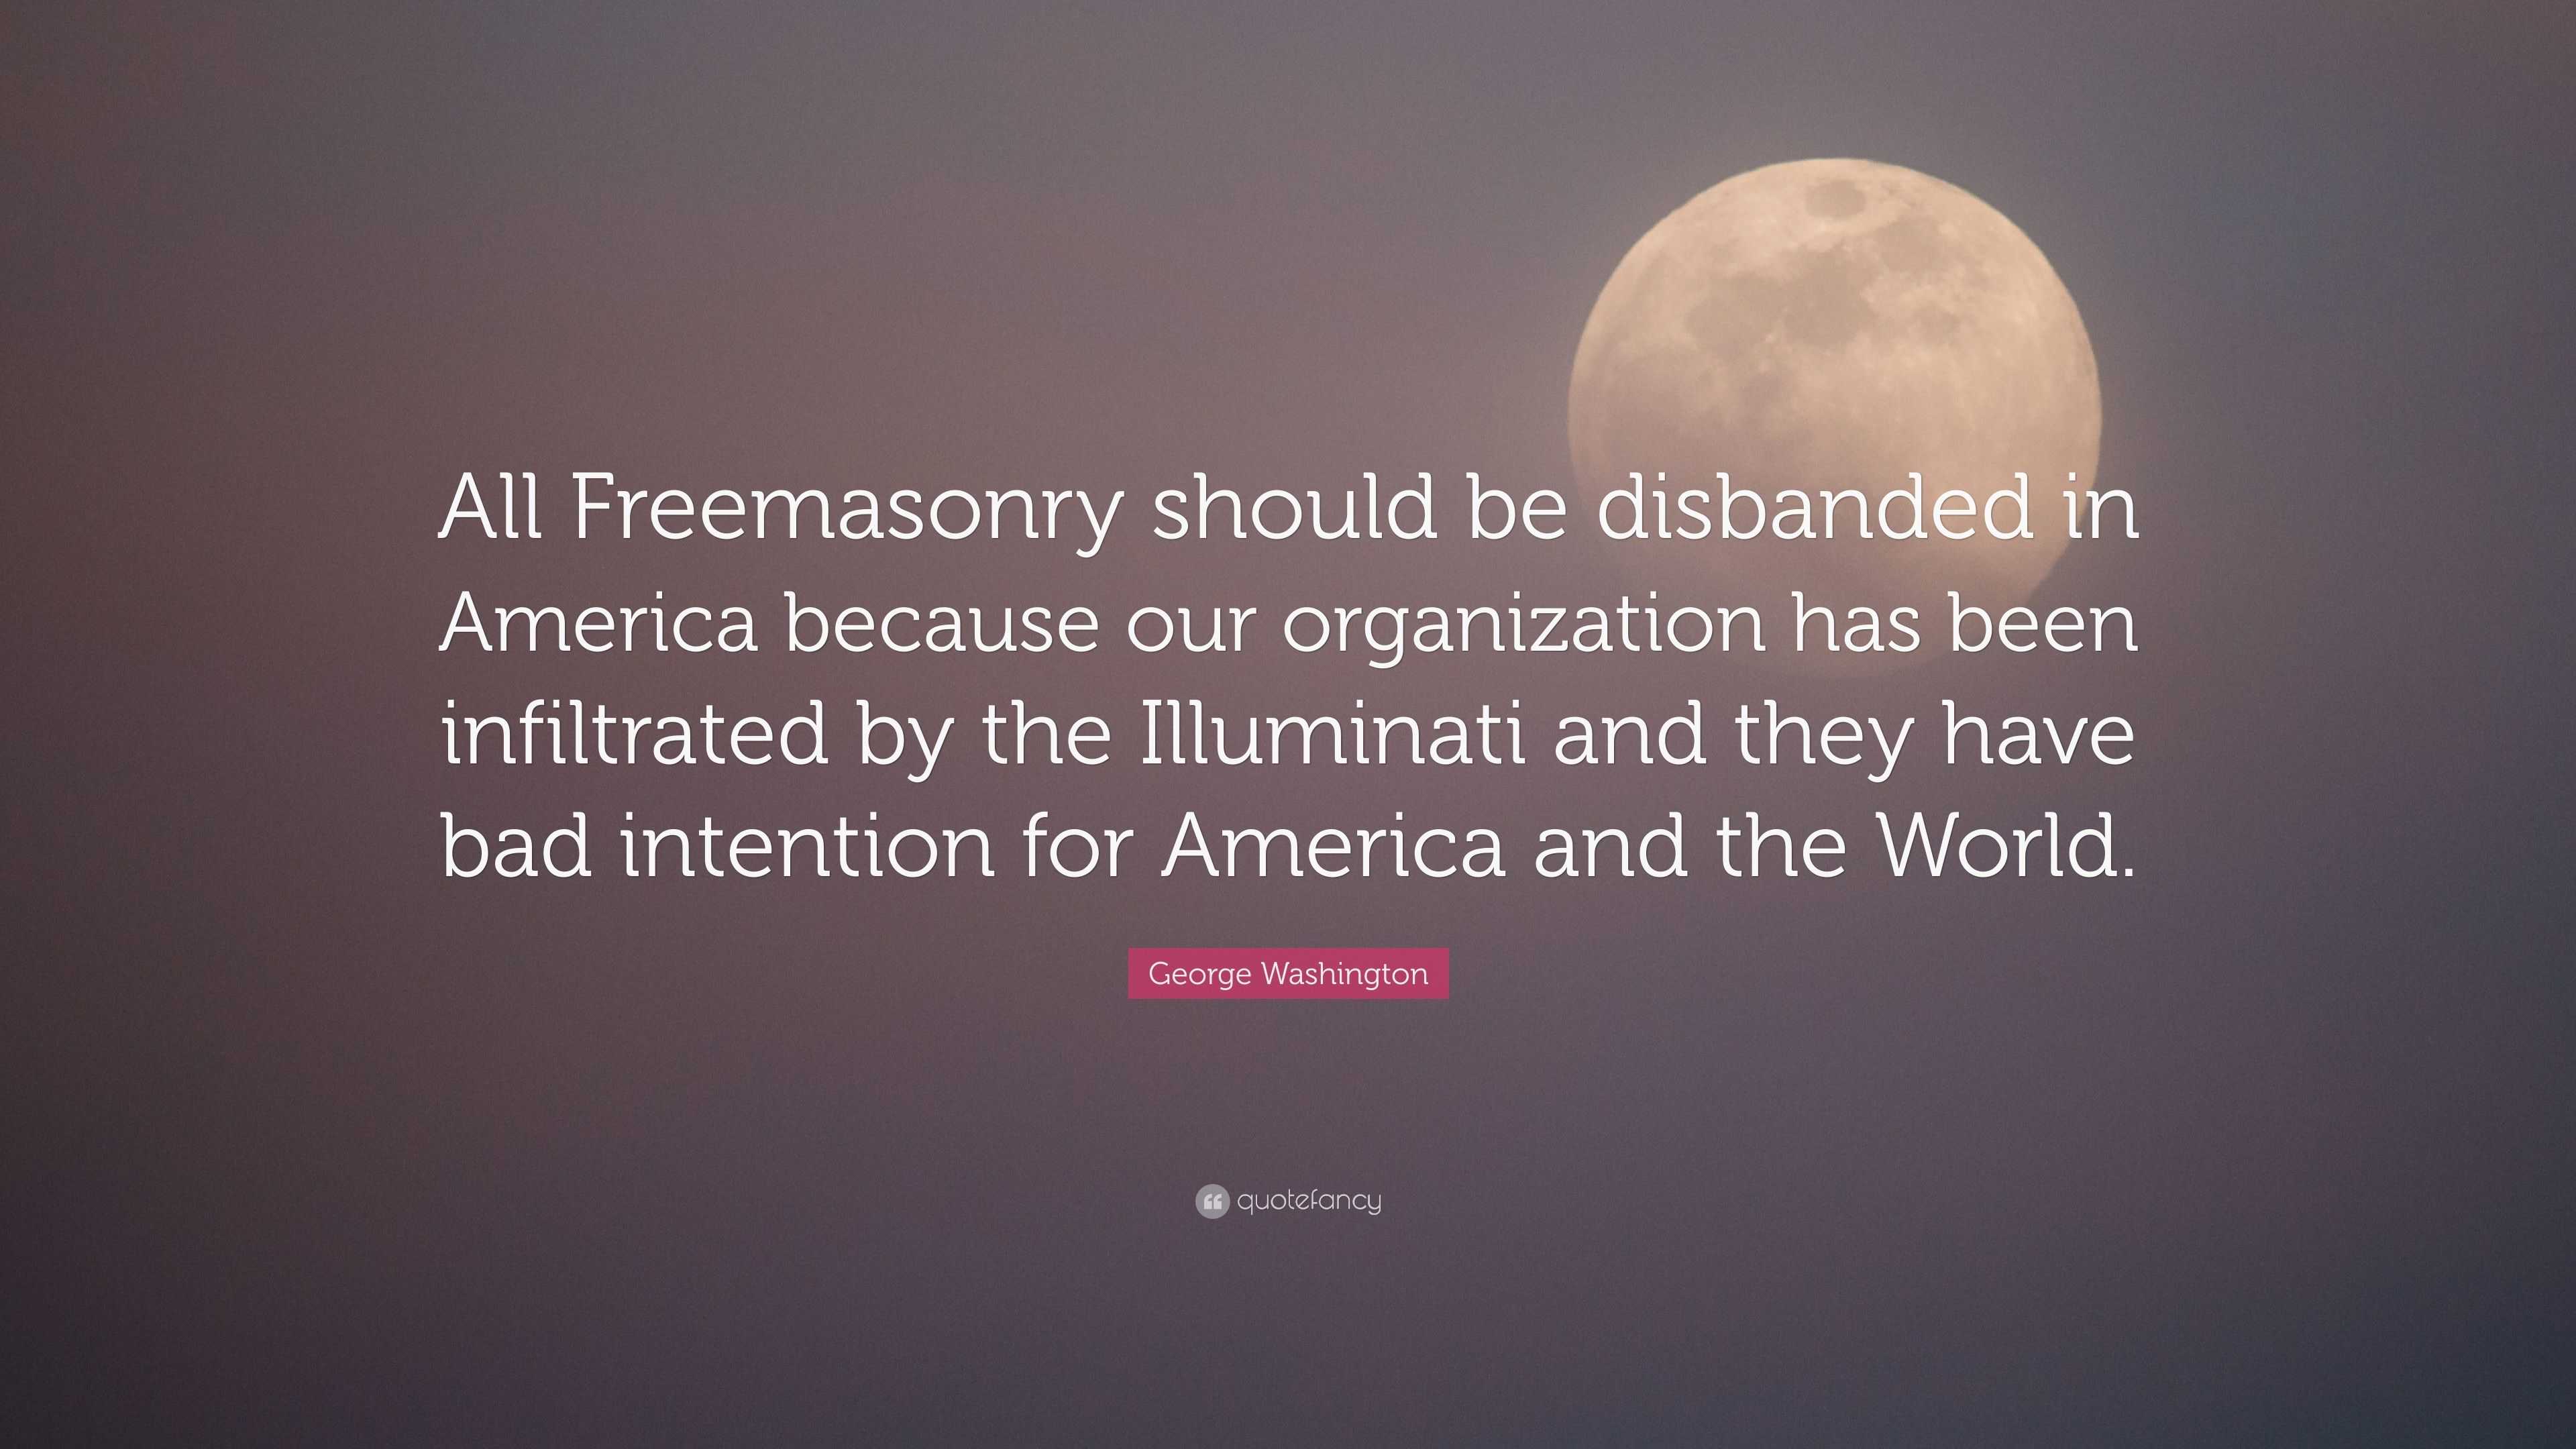 George Washington Quote: “All Freemasonry should be disbanded in